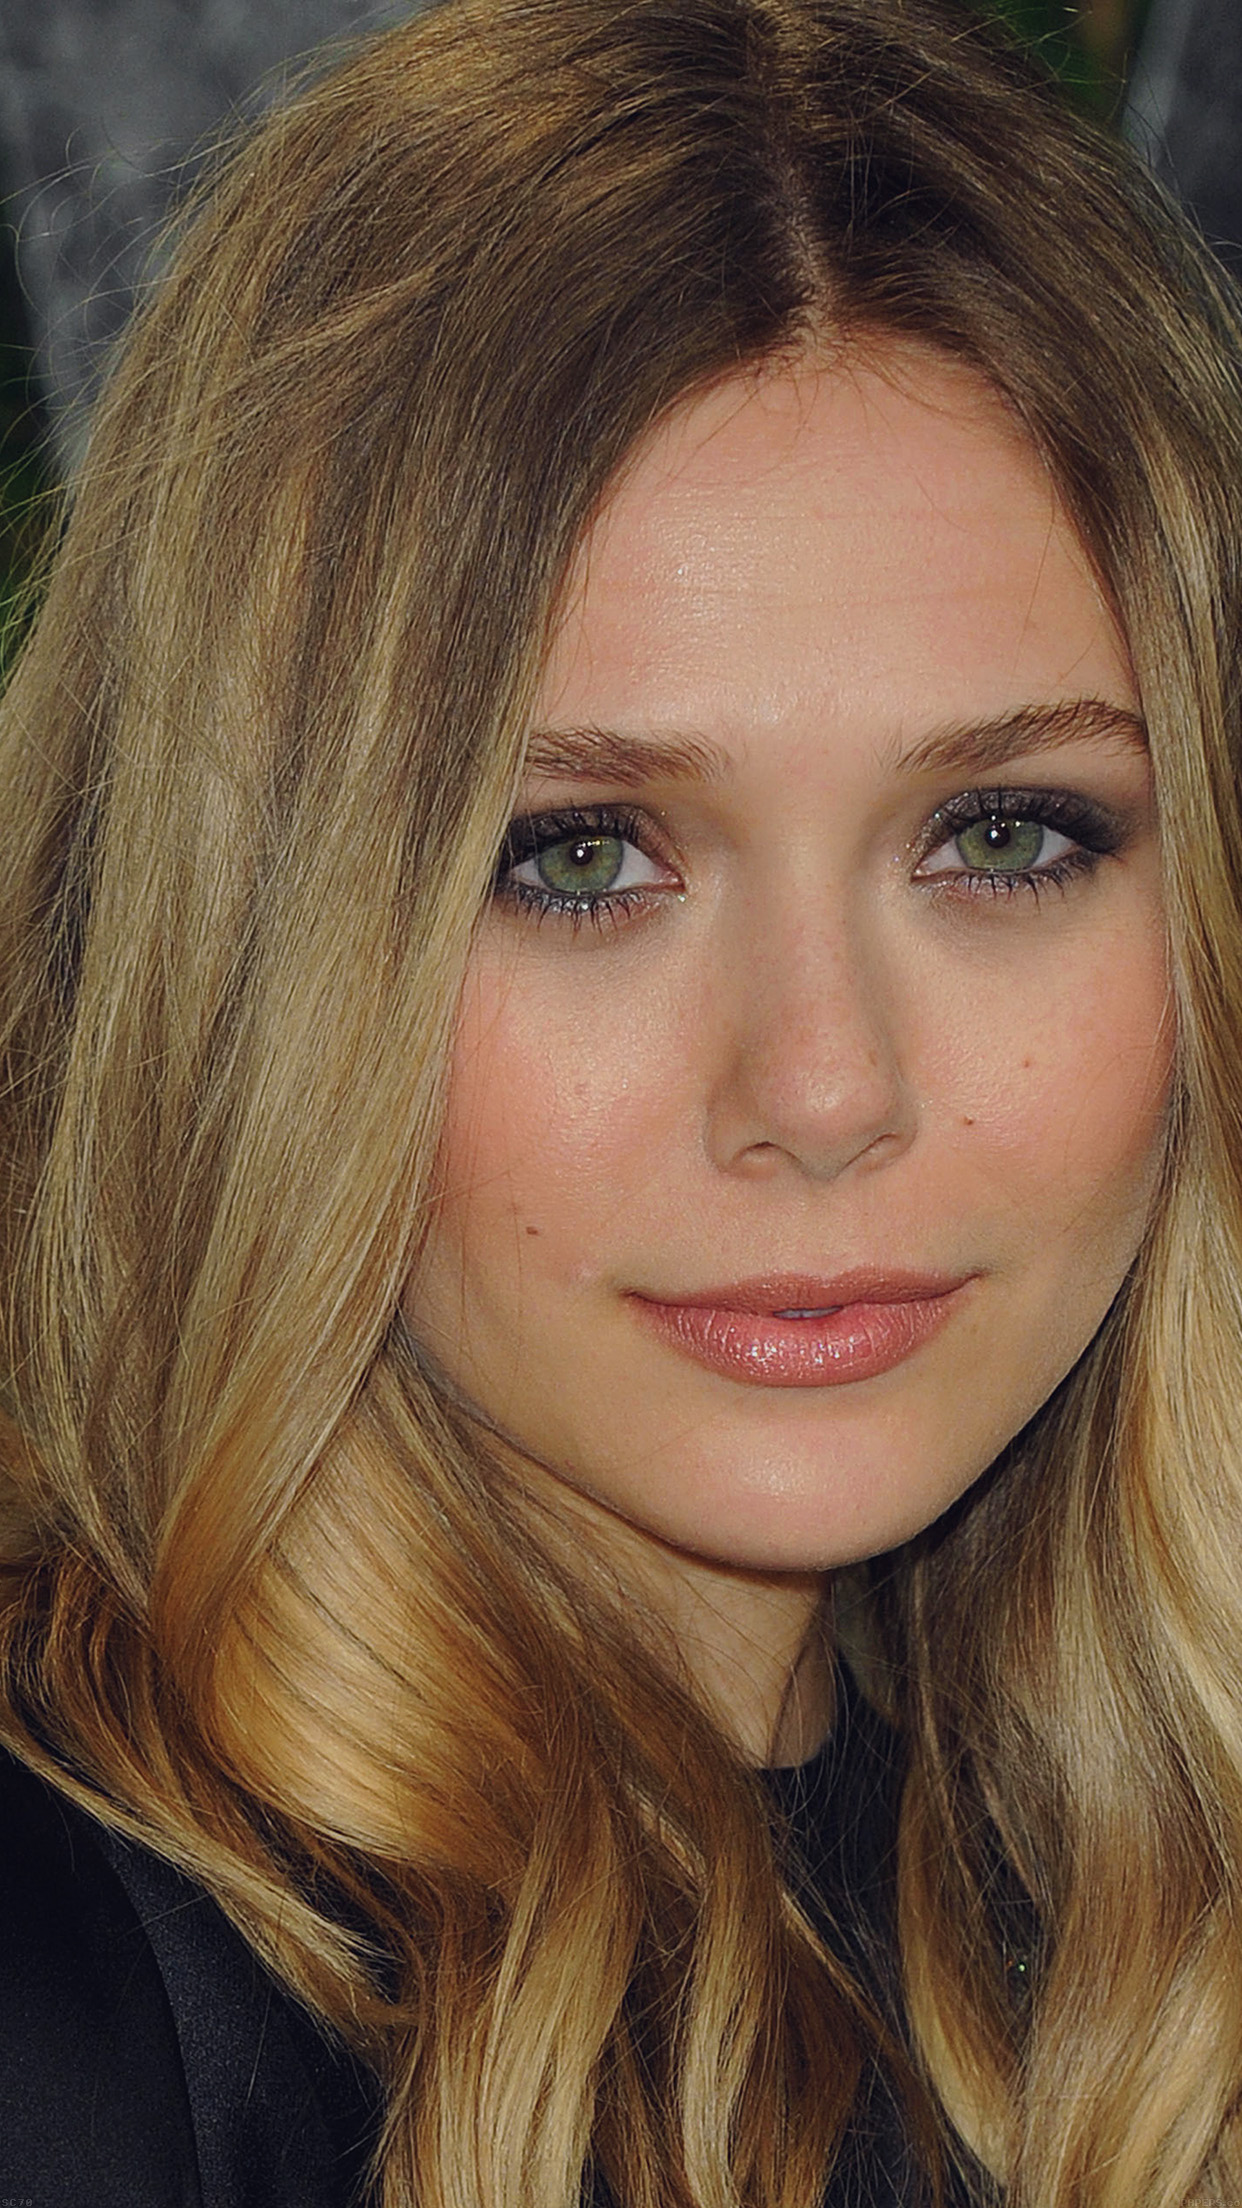 Elizabeth Olsen American Actress Singer Android wallpaper - Android HD ...